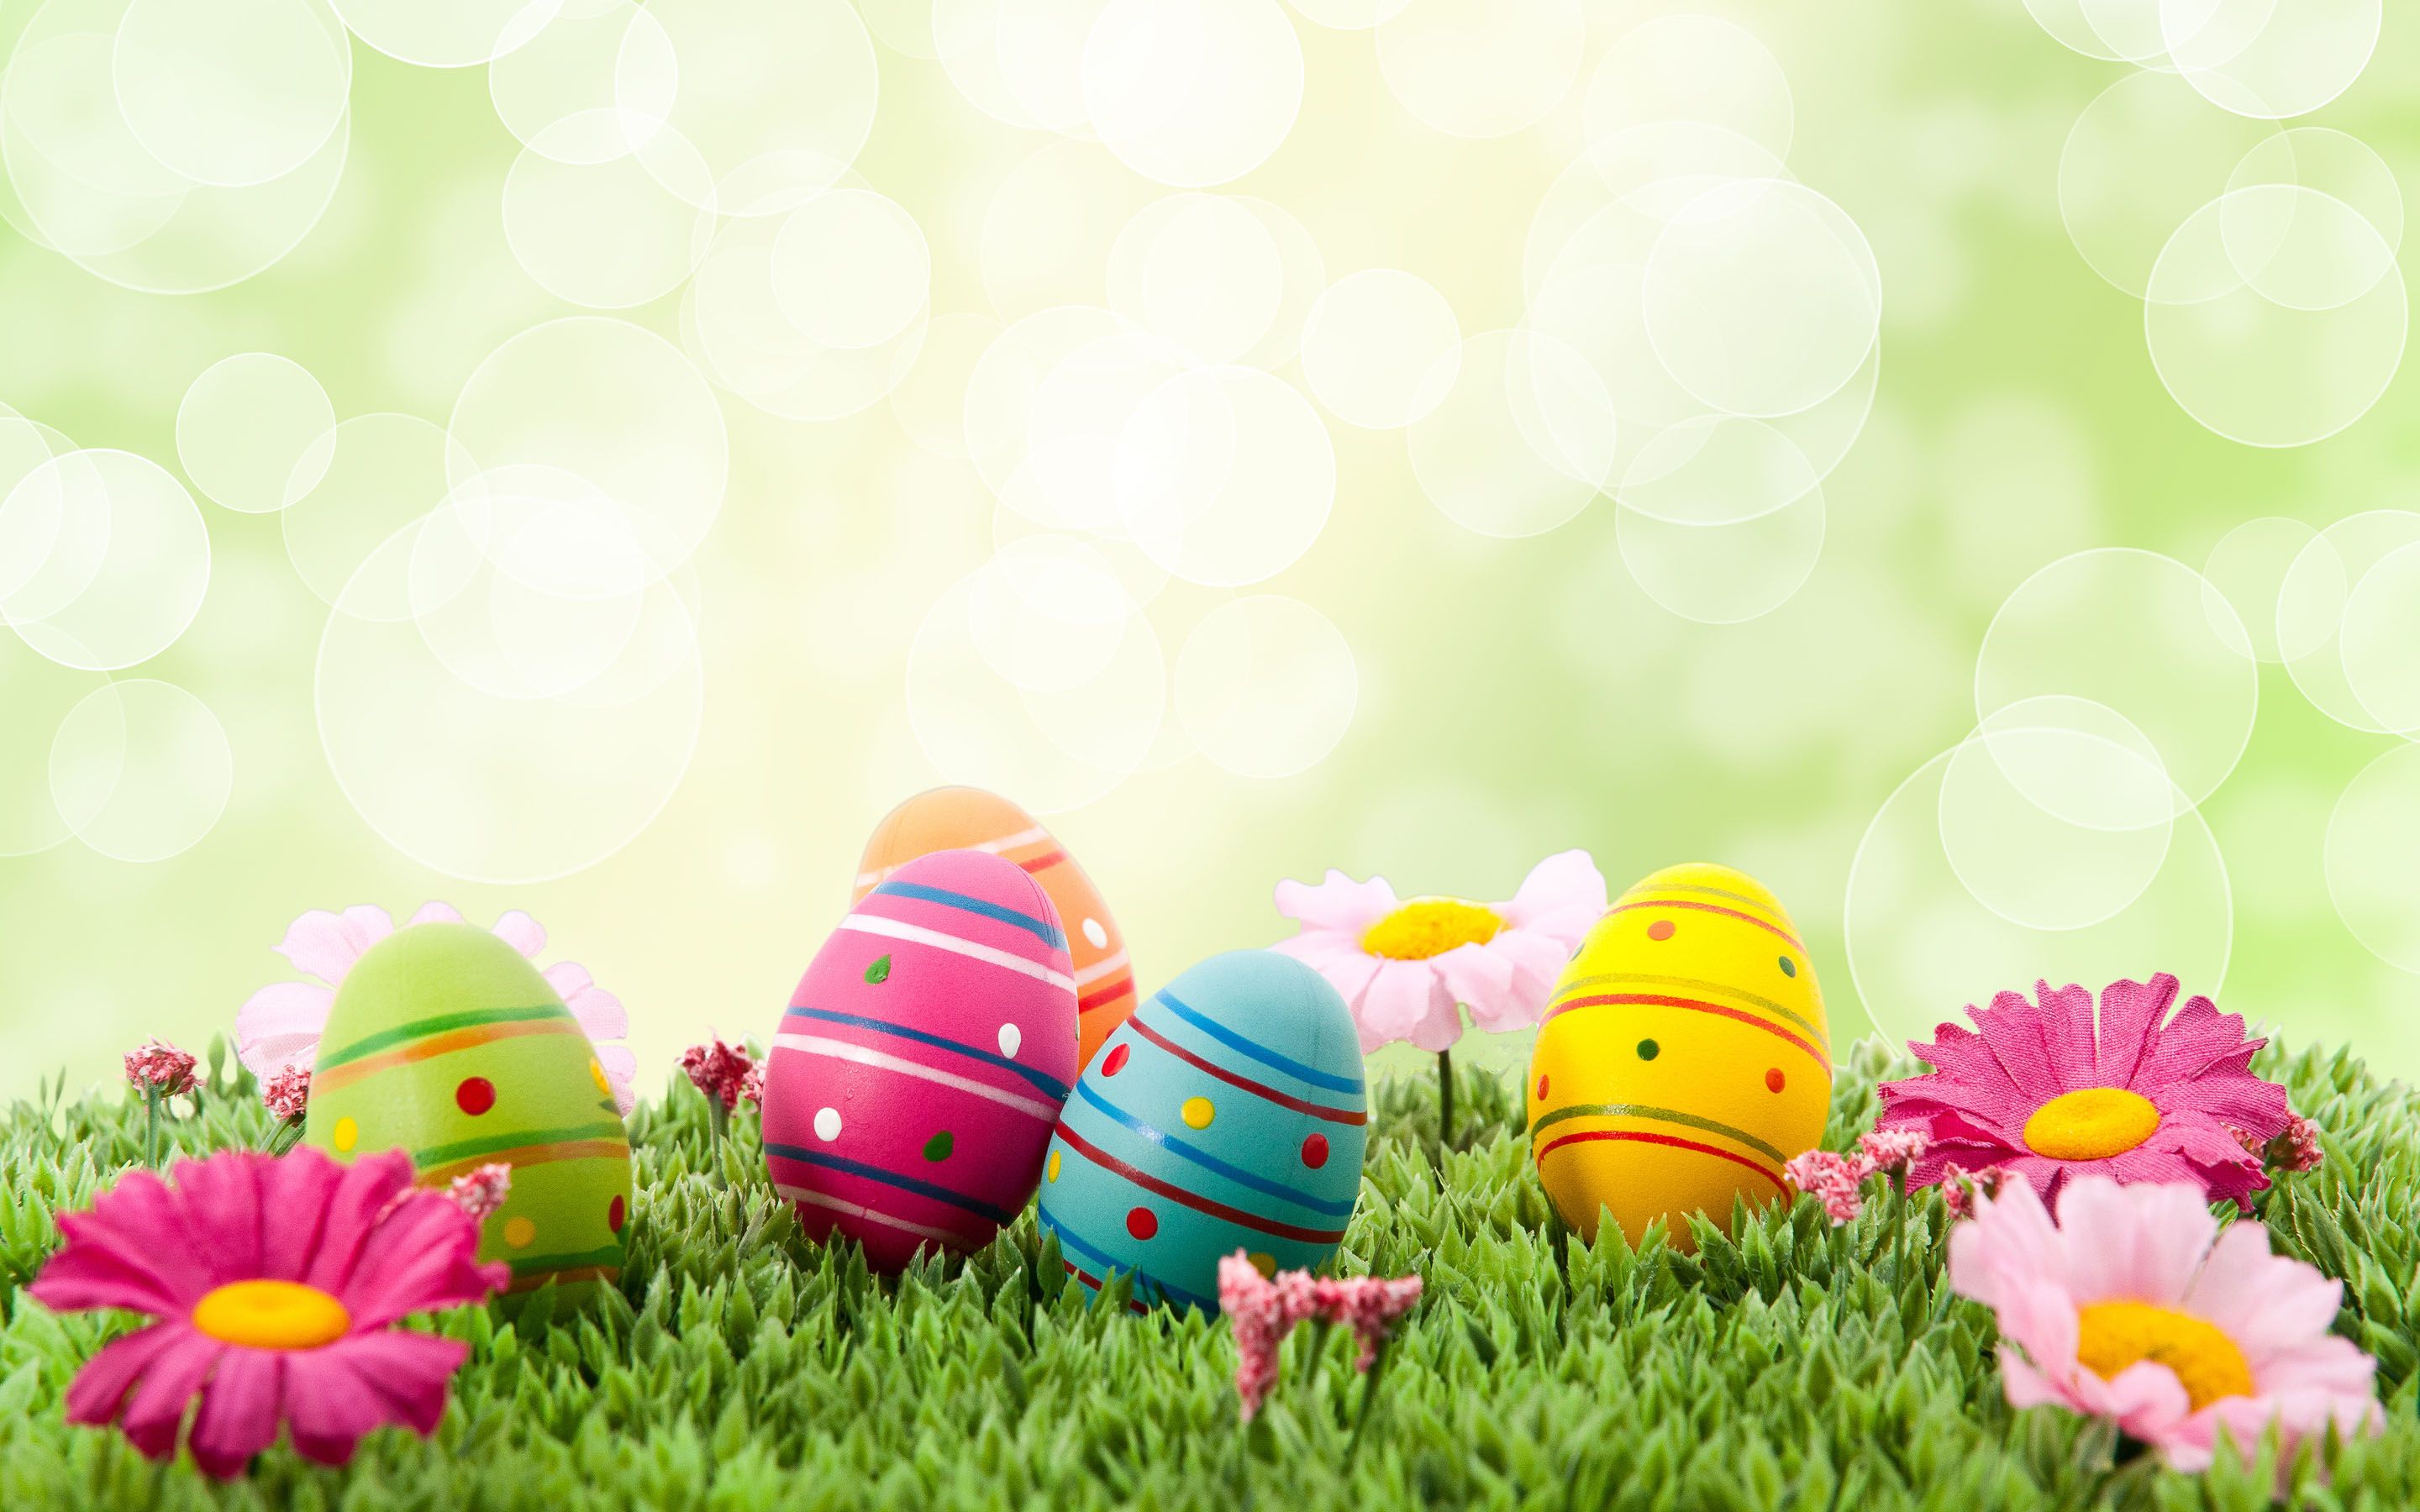 32 BEAUTIFUL EASTER WALLPAPER FREE TO DOWNLOAD Easter wallpaper